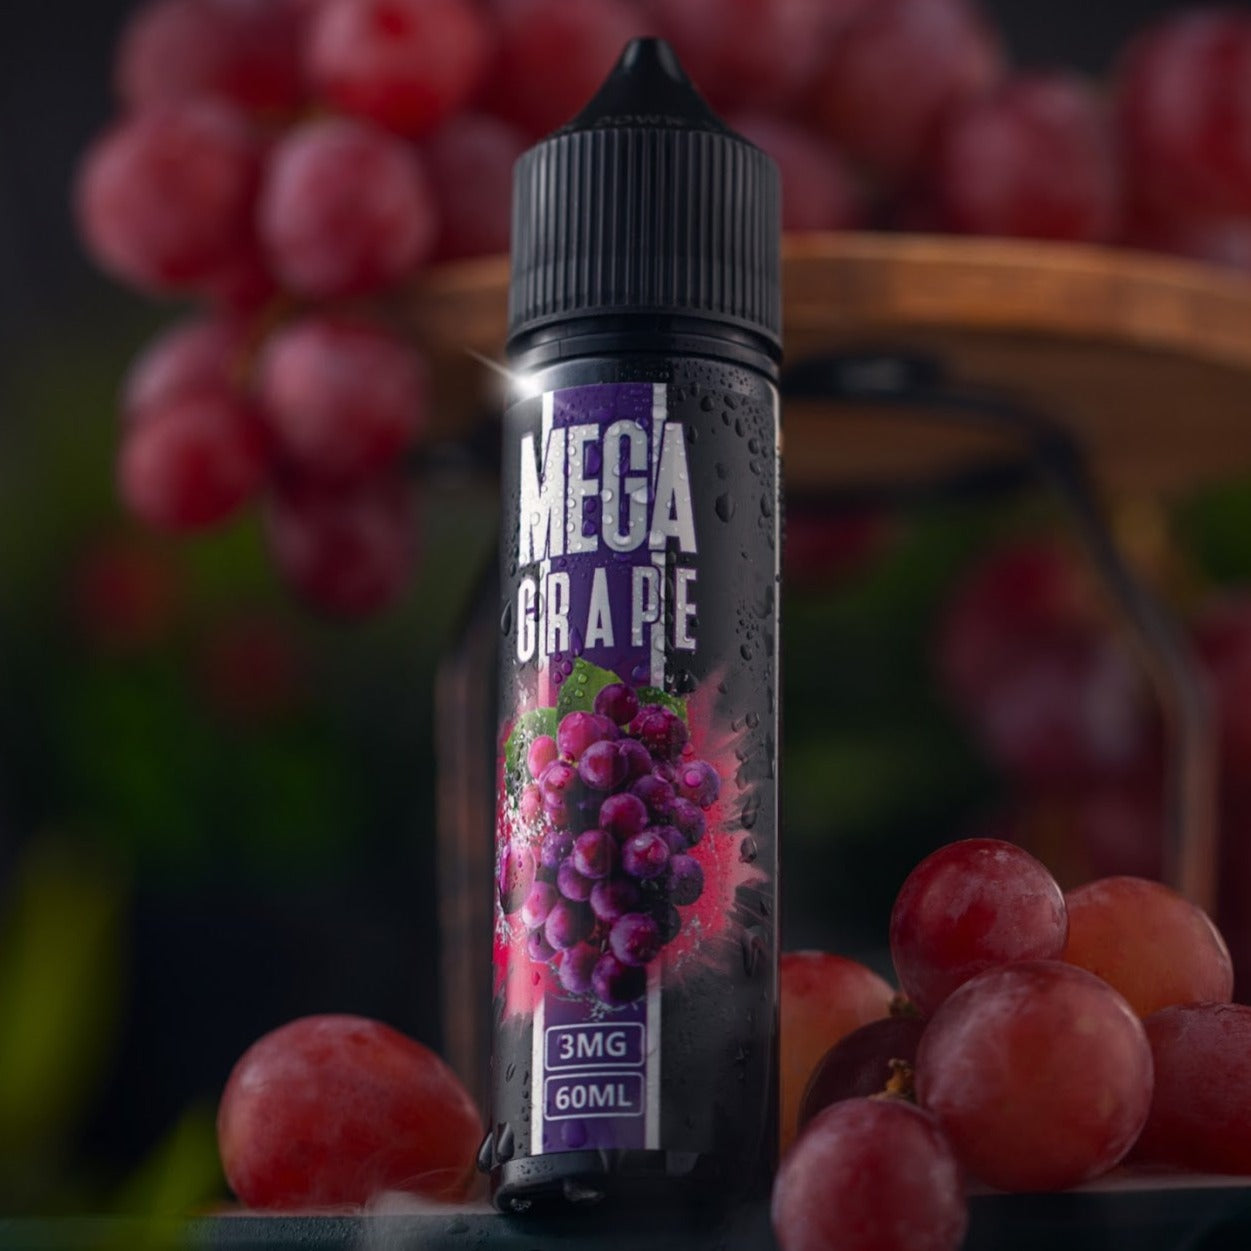 Mega Grape by GRAND - A delightful blend of real grape flavors in e-liquid form for a truly grapey vaping experience.